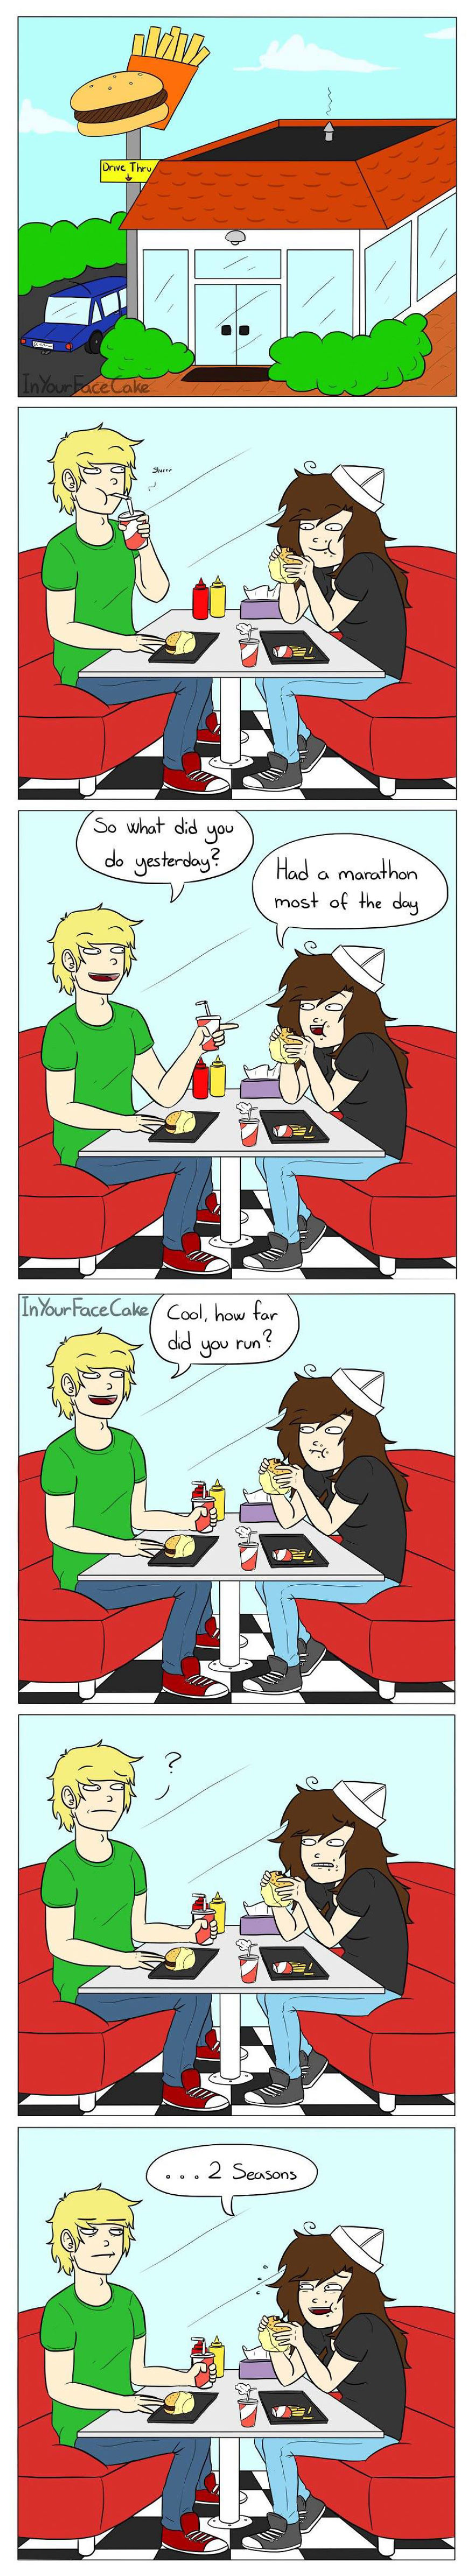 In Your Face Cake Comics - Oc